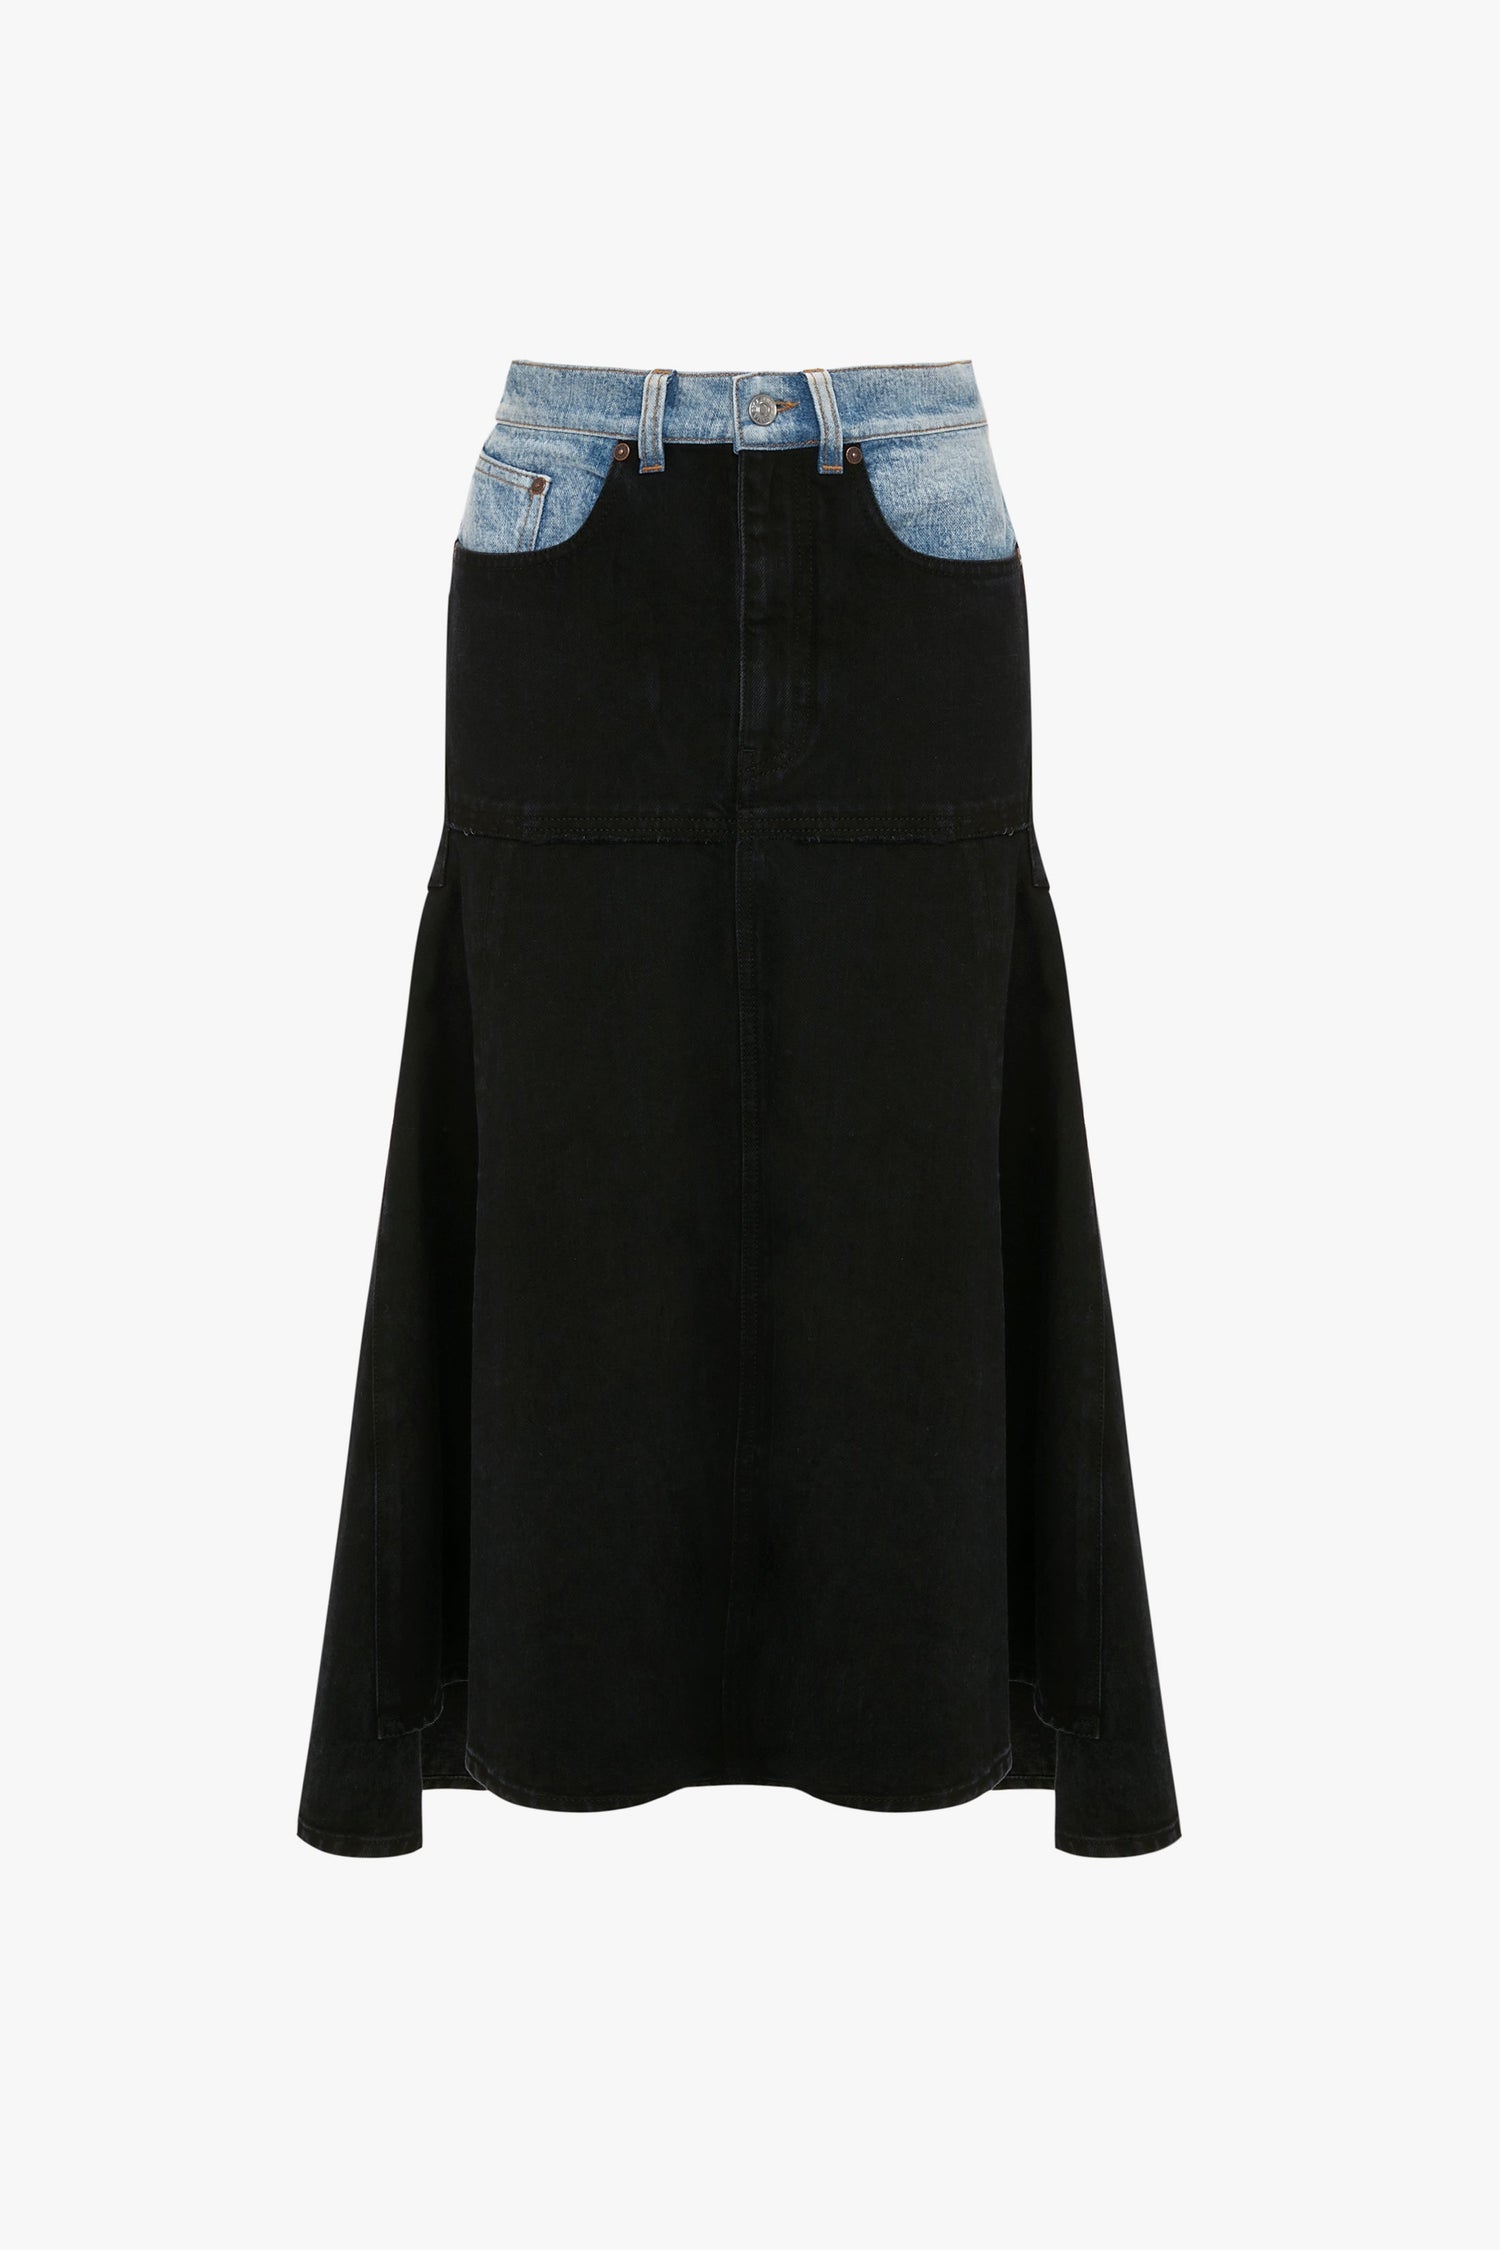 Buy max Cotton Western Skirt Black at Amazon.in